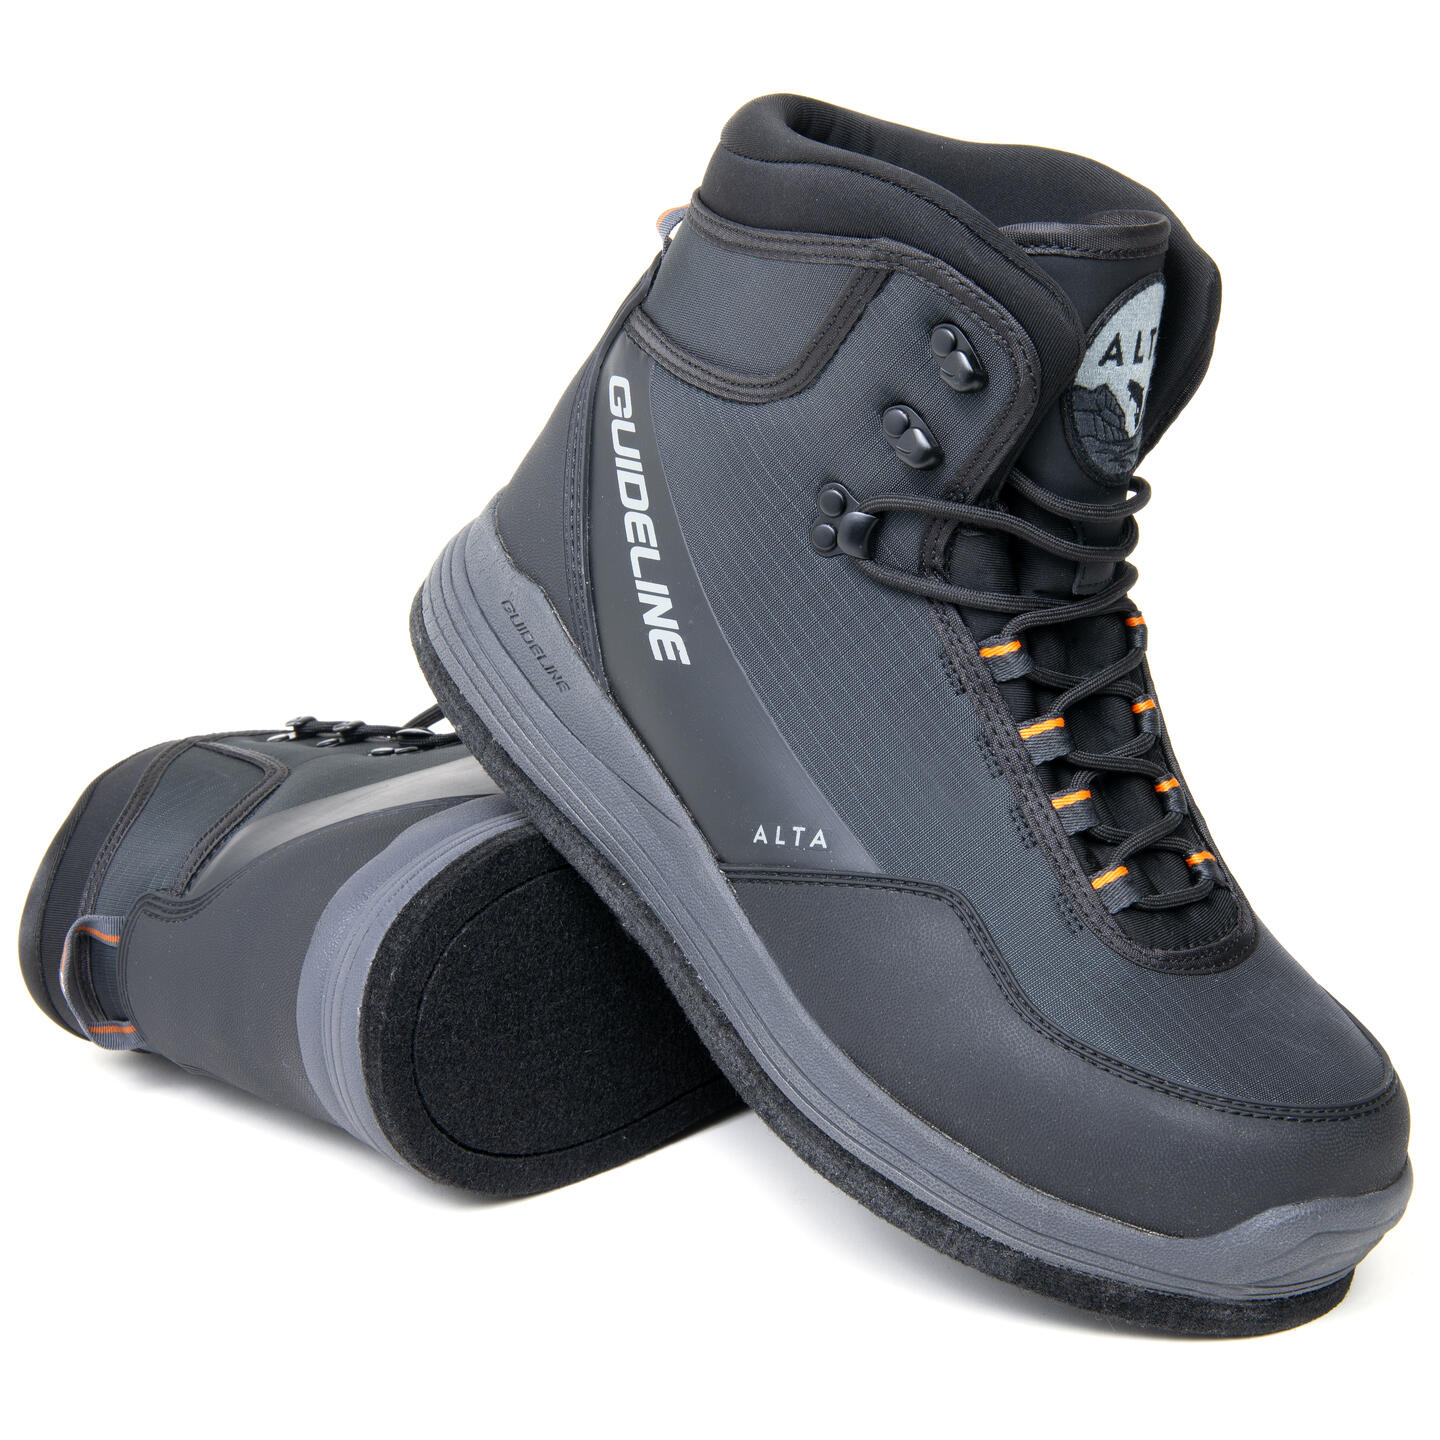 https://www.czechnymph.com/data/web/eshop/guideline/new-products-2024/clothing/wading-boots/alta-ngx-boot-felt/guideline-wading-boots-alta-ngx-boot-felt-graphite-main.jpeg